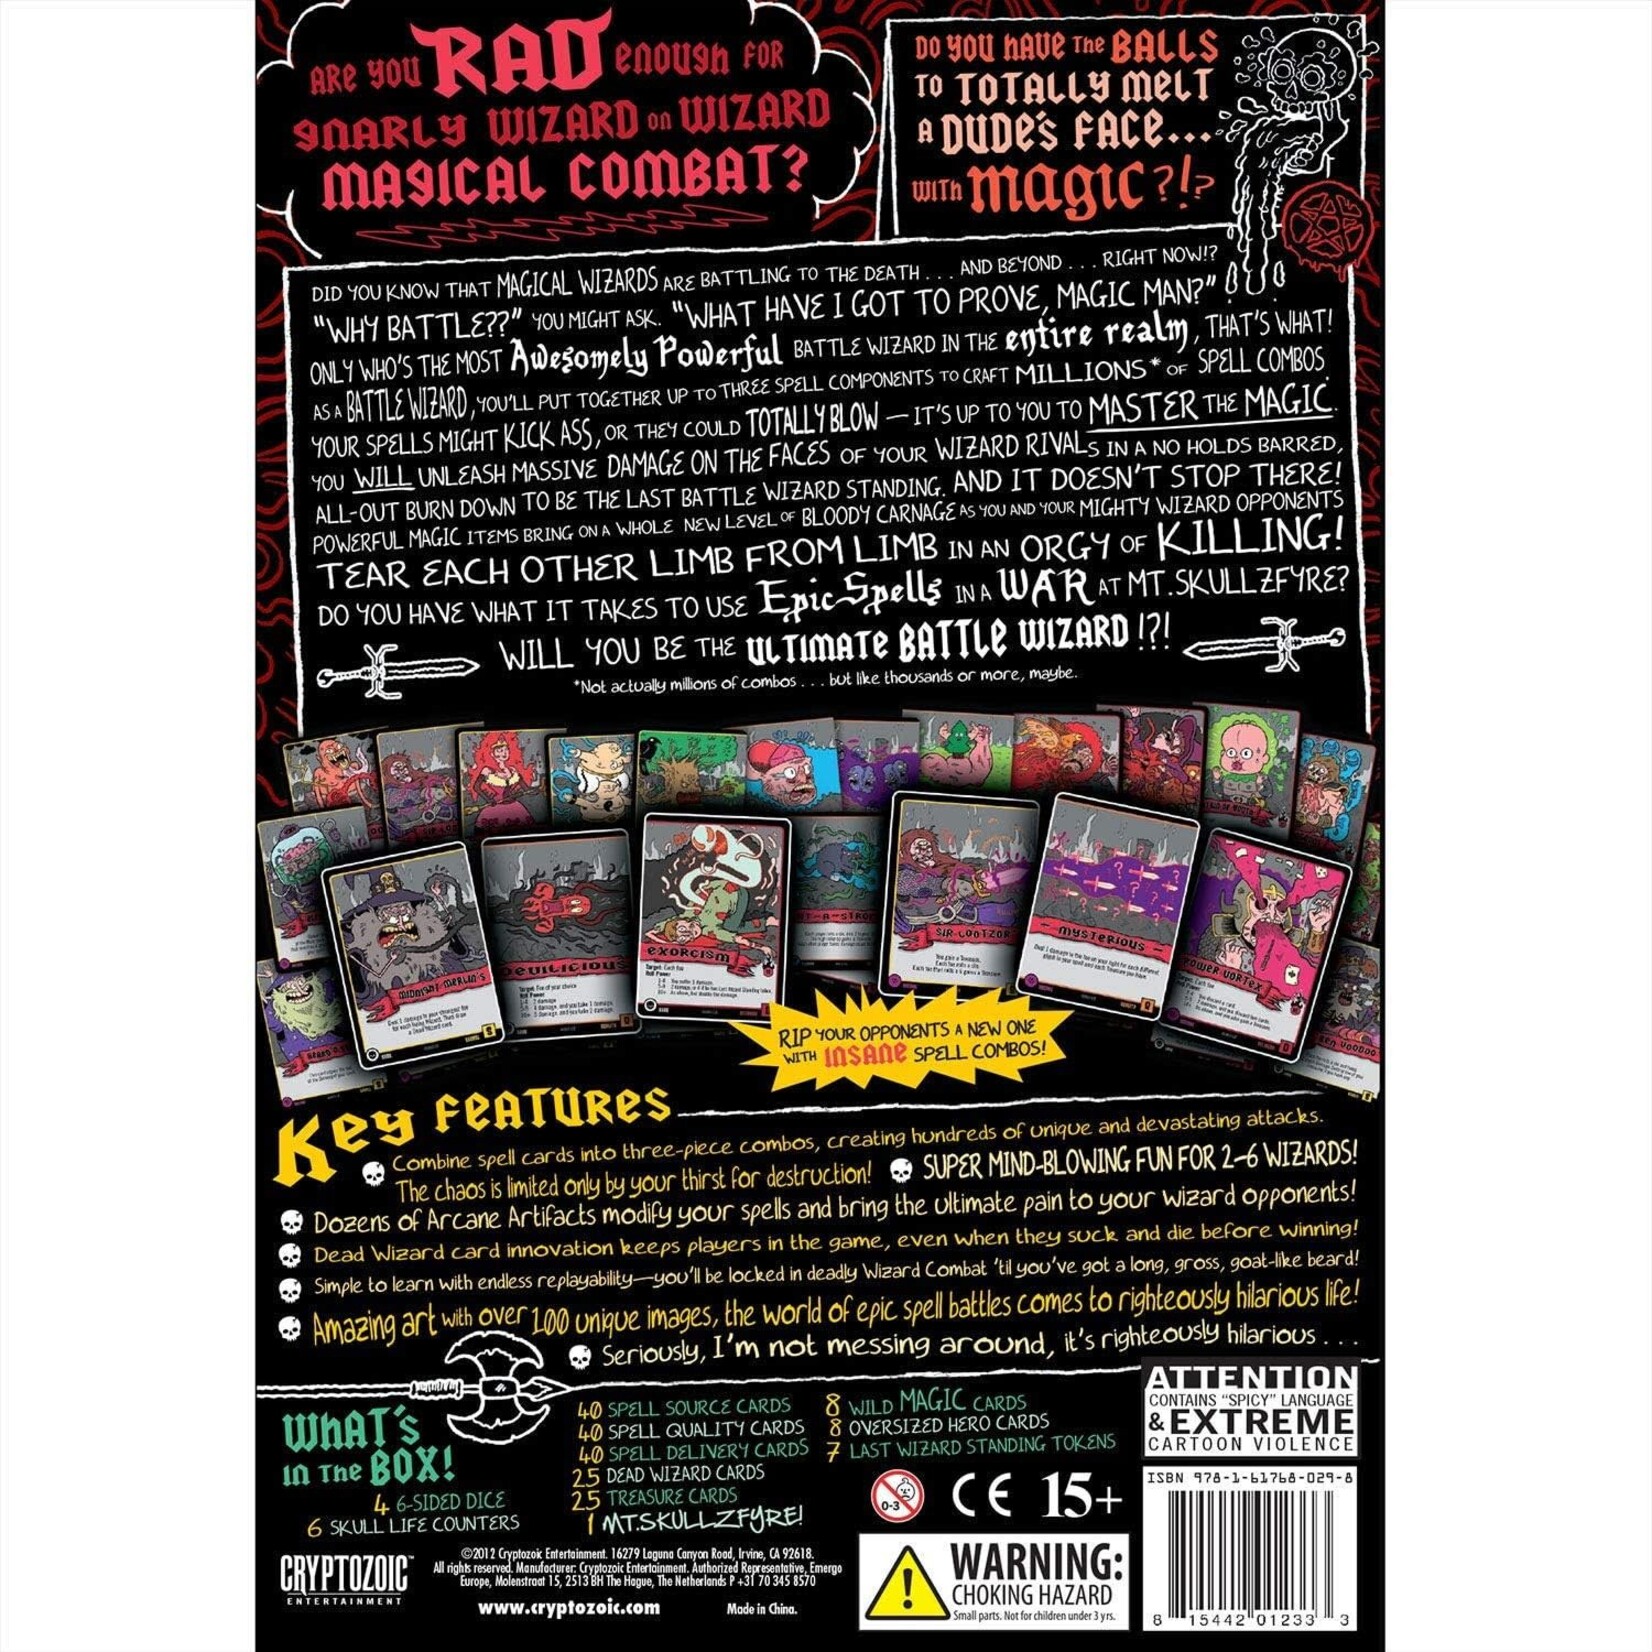 Cryptozoic Entertainment Epic Spell Wars of the Battle Wizards: 1 - Duel at Mount Skullzfyre